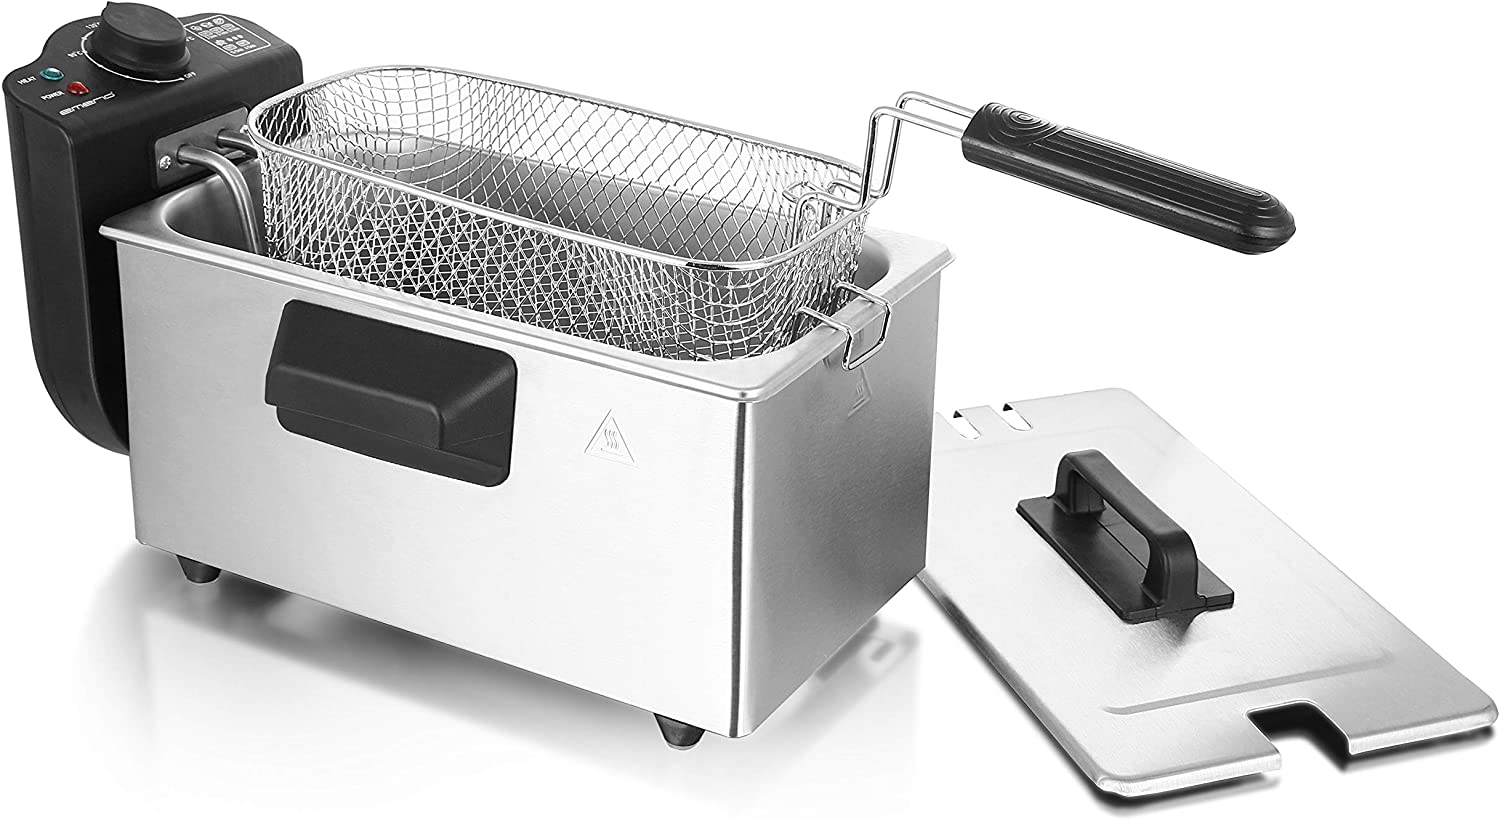 Emerio DF-120482 Cold Zone Fryer, 3.0 L, Stainless Steel, BPA-Free, 2000, 3 Litres, Silver